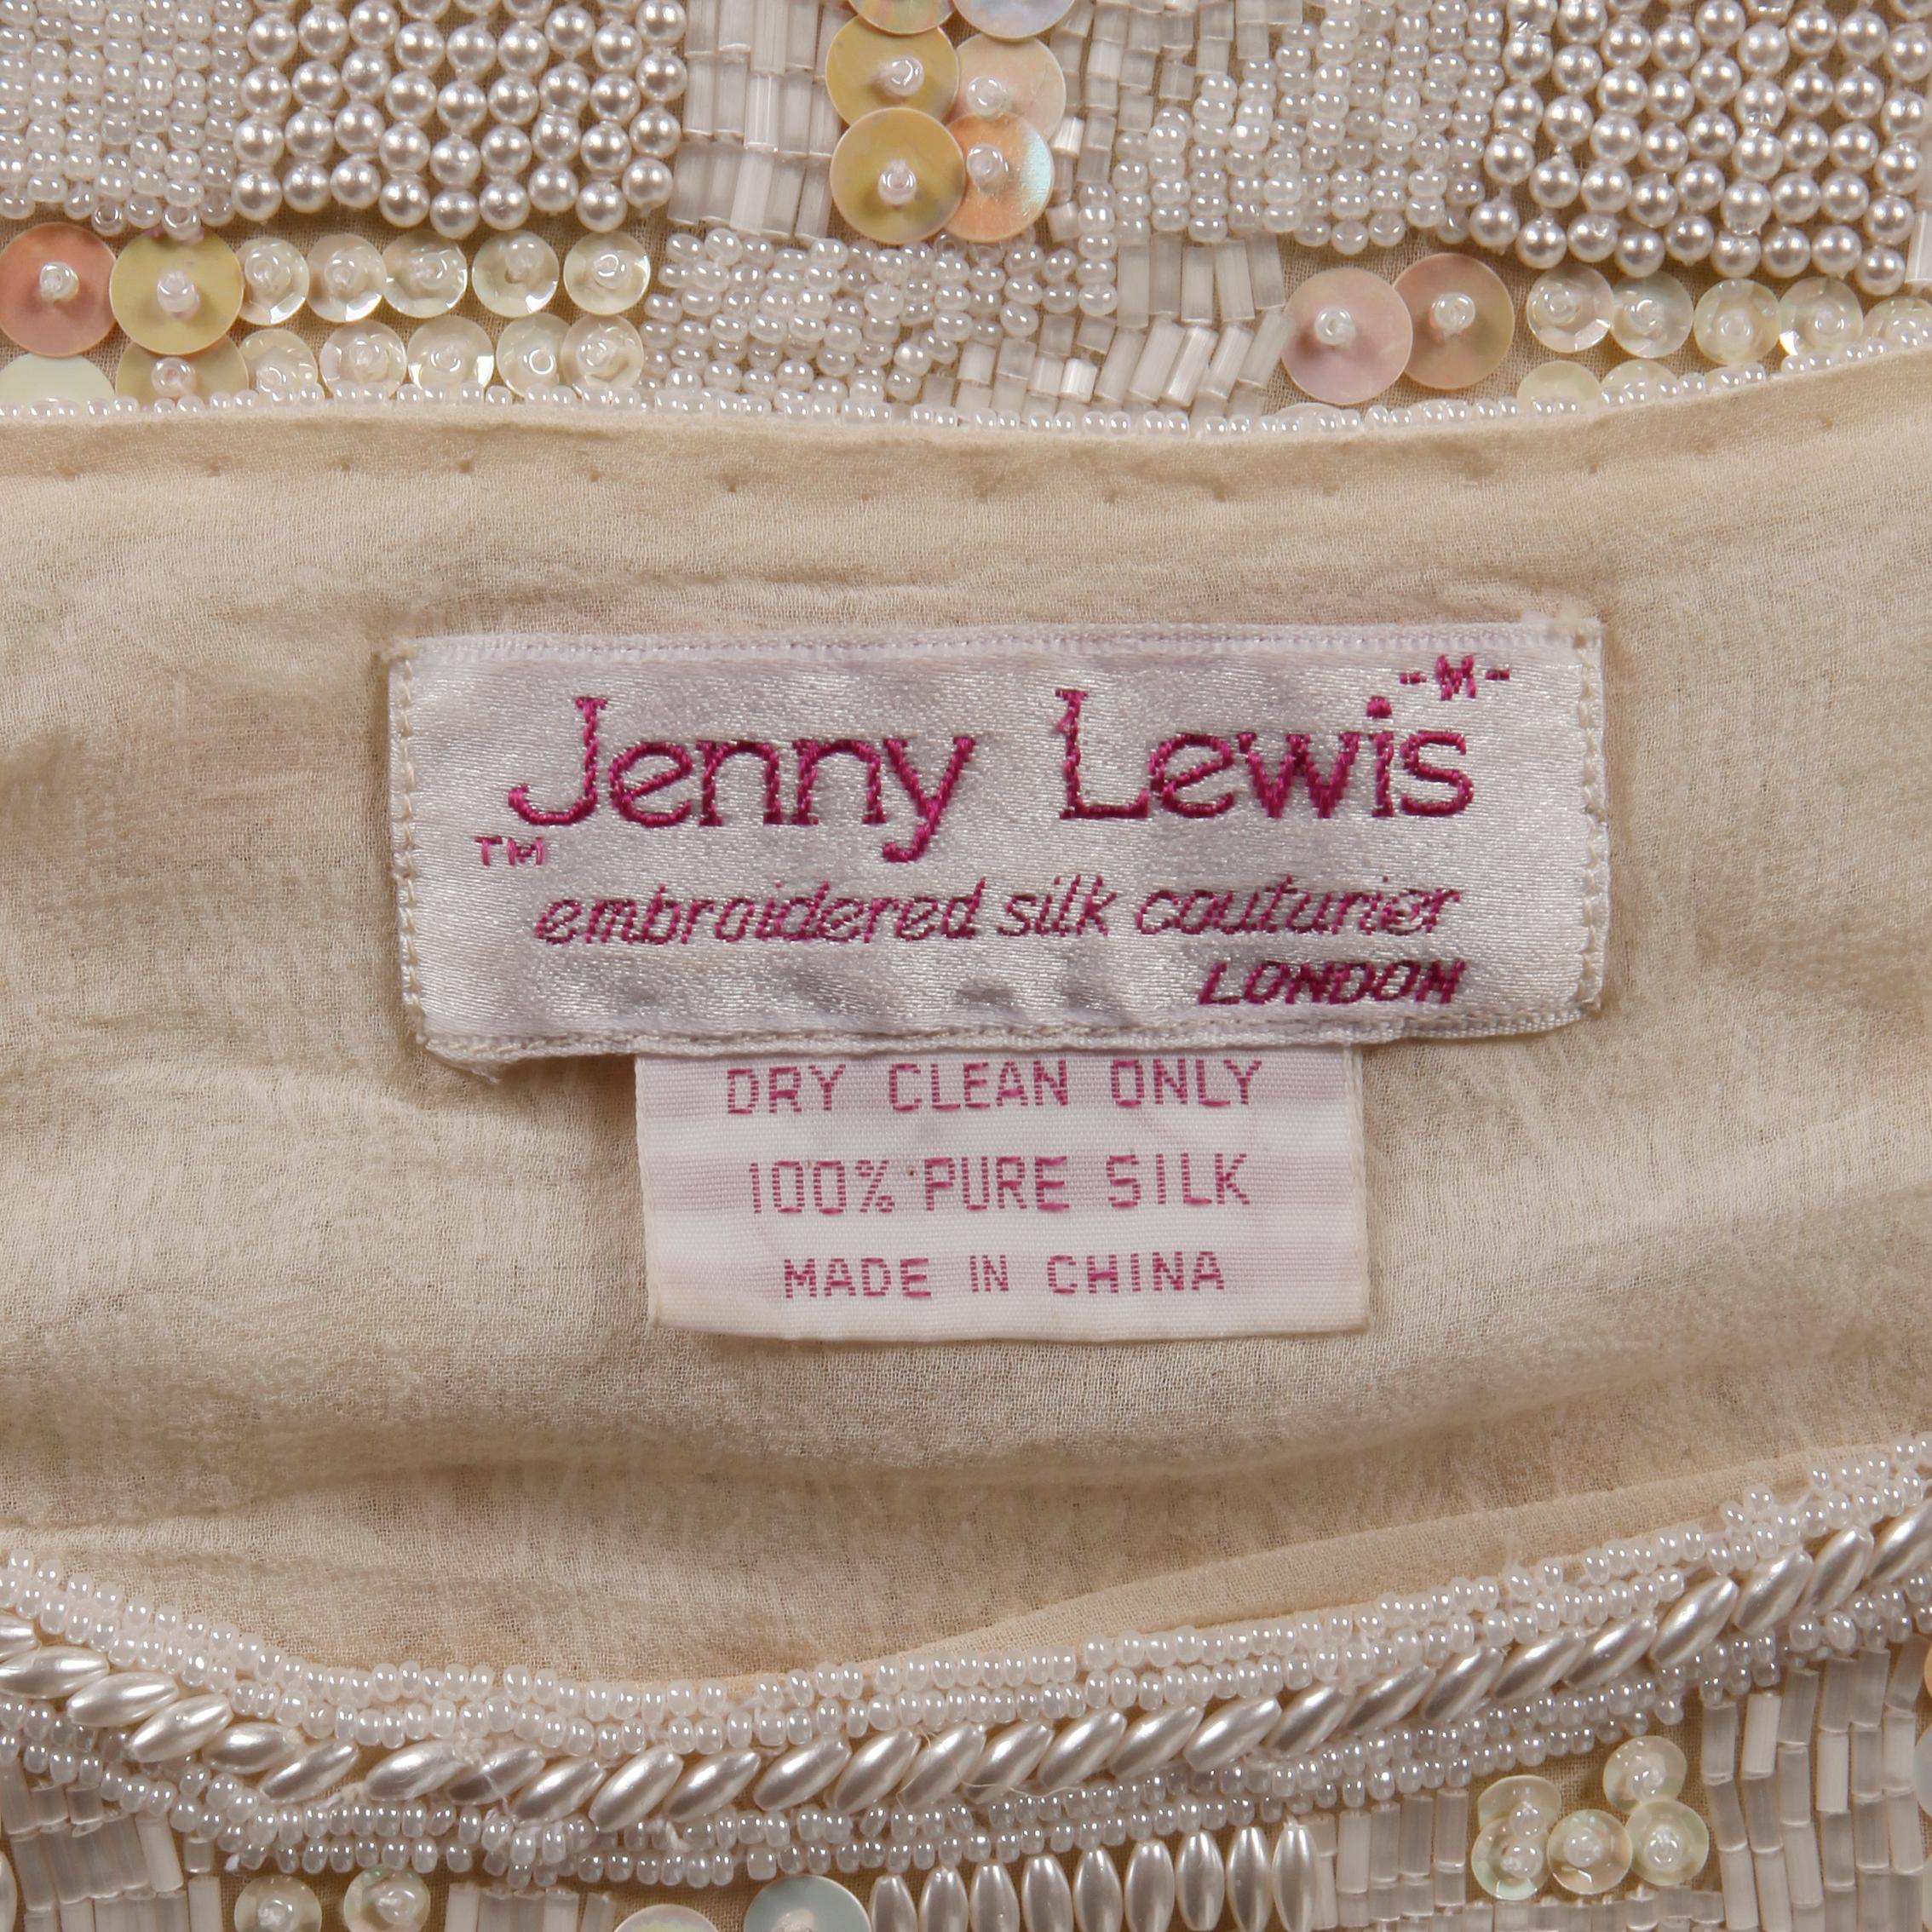 Vintage 1980s heavy silk dress top/ shirt entirely encrusted with tiny beads and sequins by Jenny Lewis. Fully lined with no closure (pulls on over the head). The marked size is Medium, but the top will fit most sizes small, medium and large on